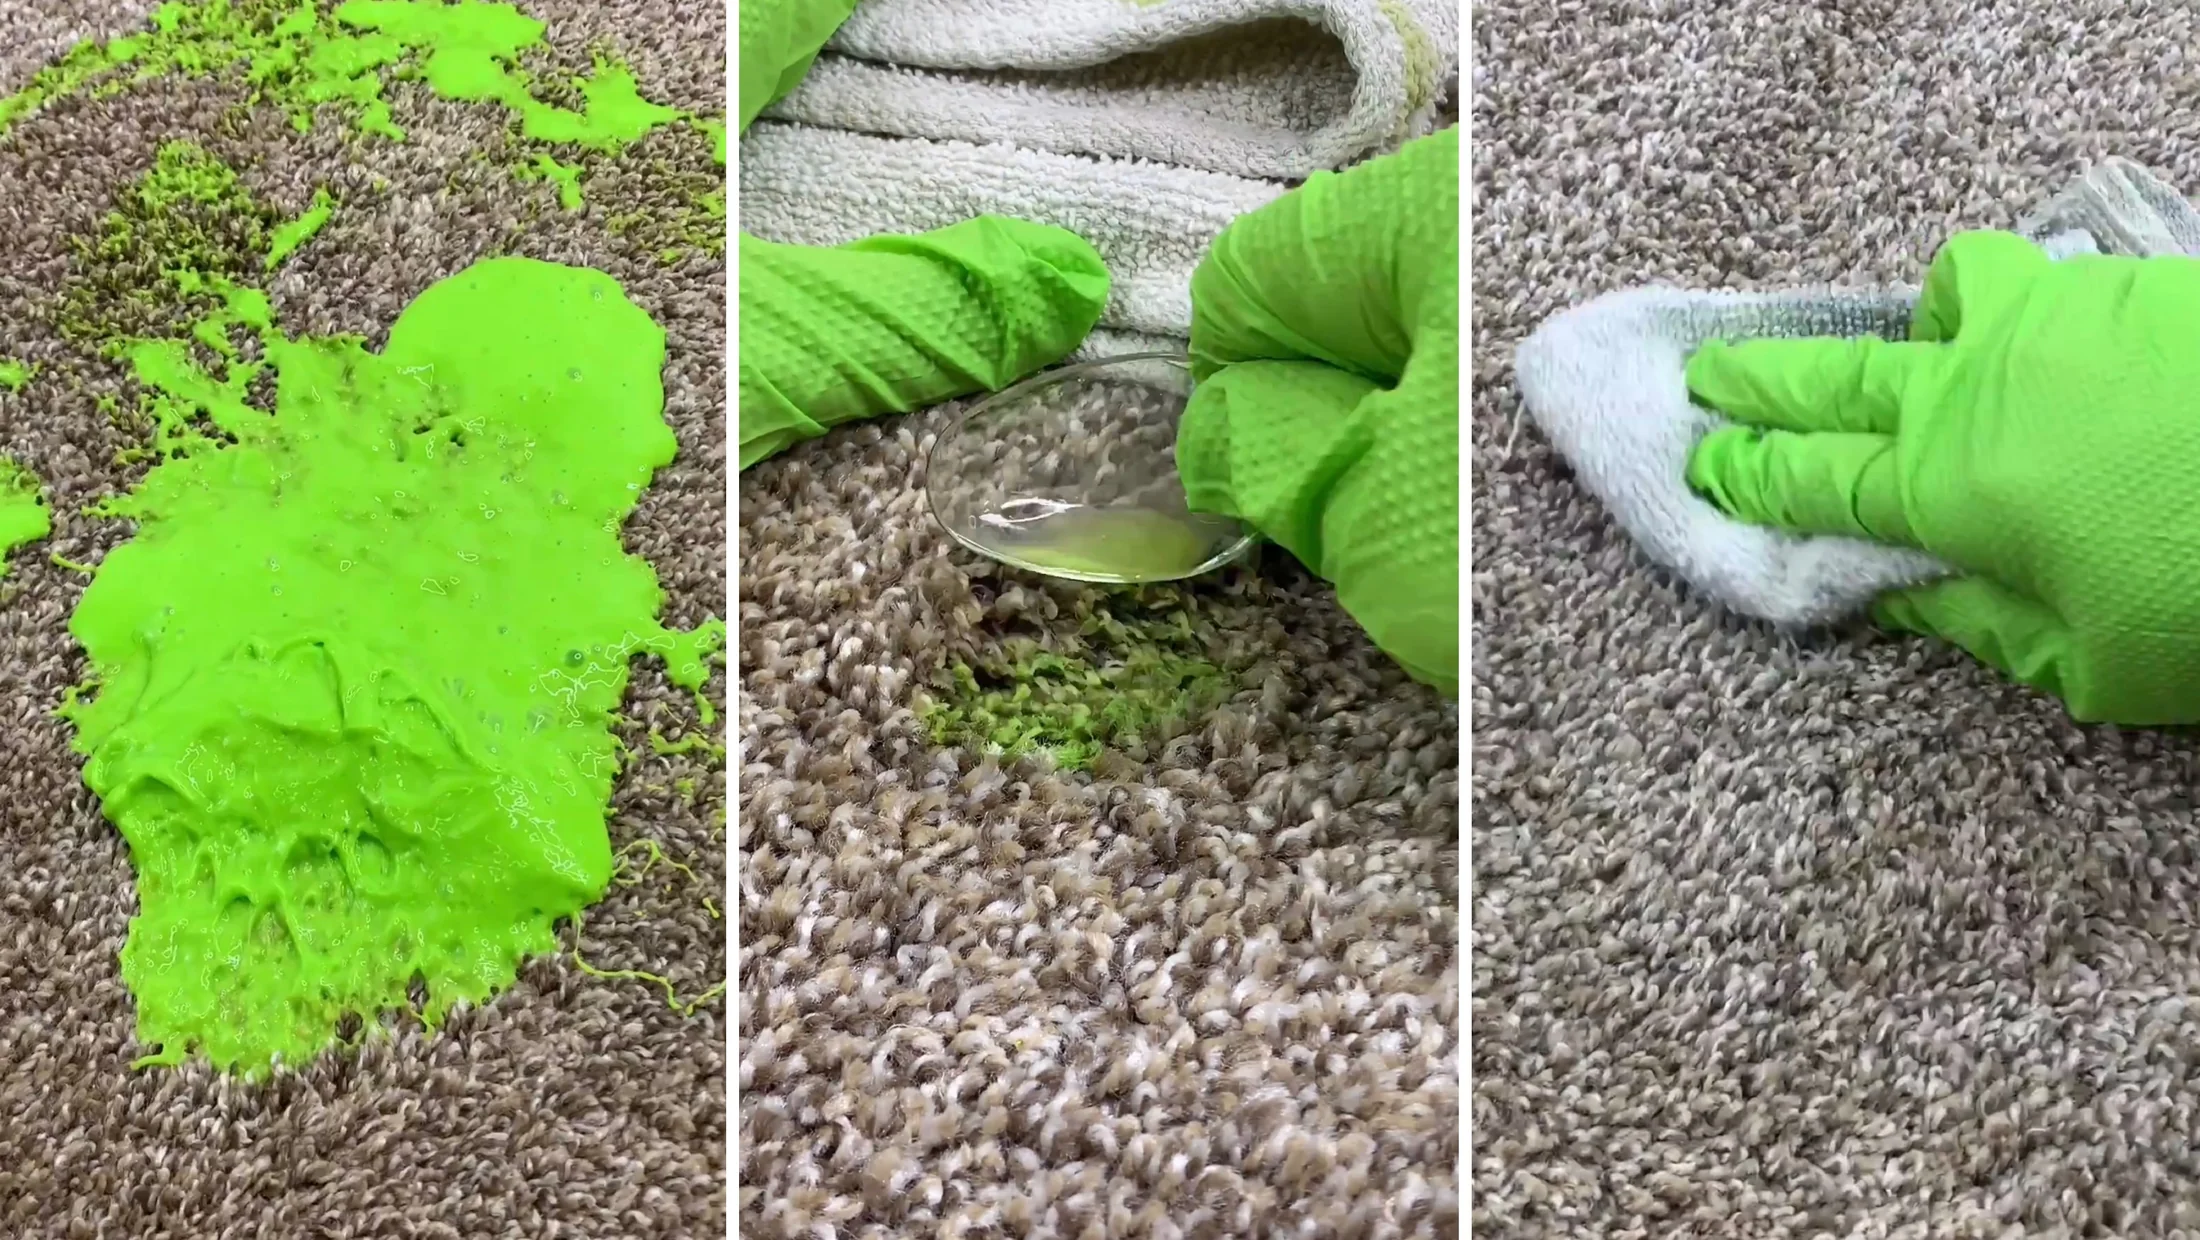 How To Remove Slime From Carpet Like A Pro Clean That Up